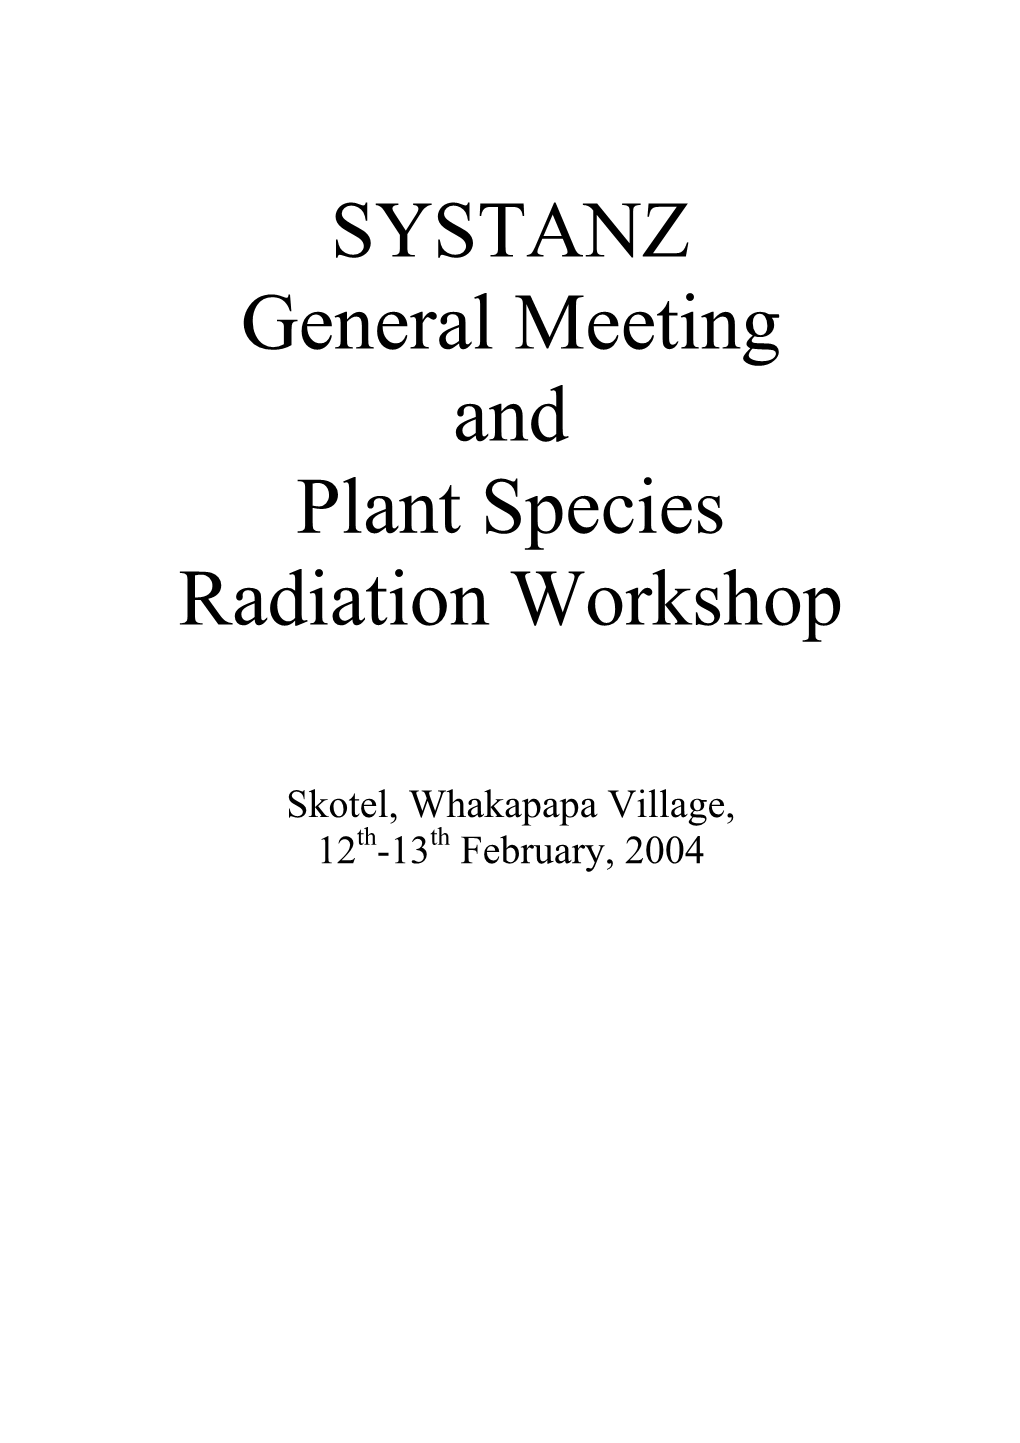 SYSTANZ General Meeting and Plant Species Radiation Workshop